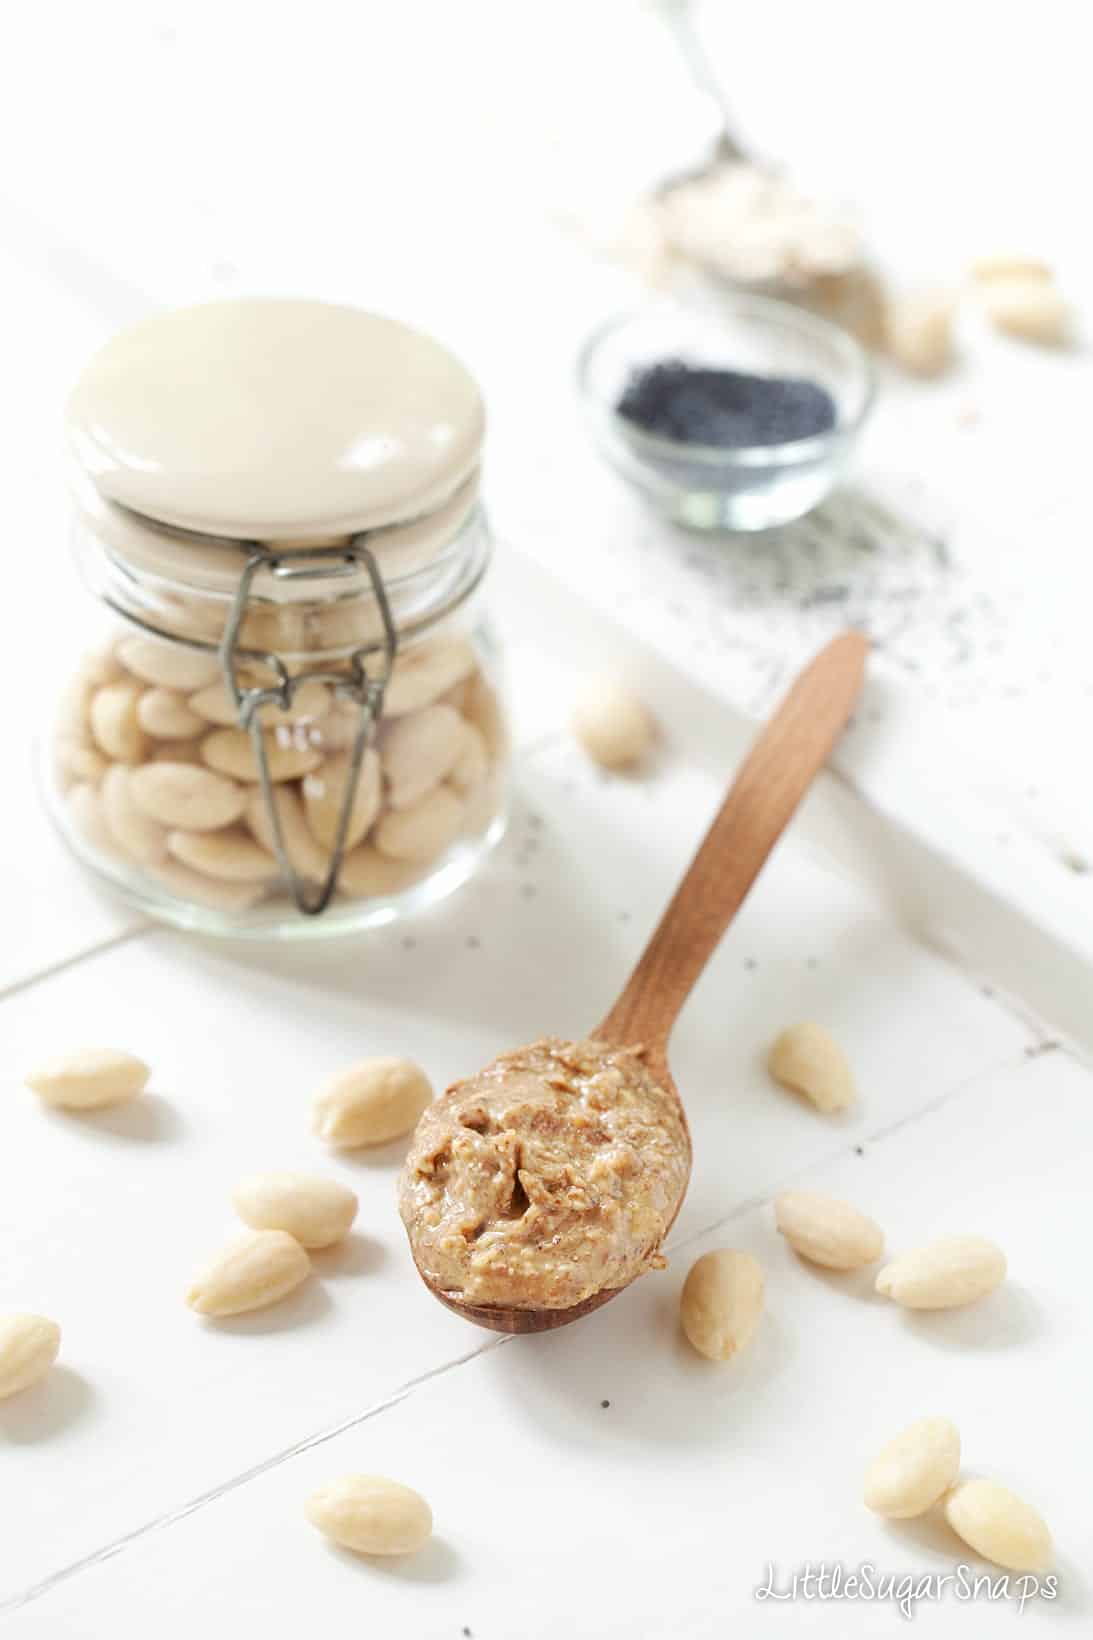 Almond butter and blanched almonds on a worktop.